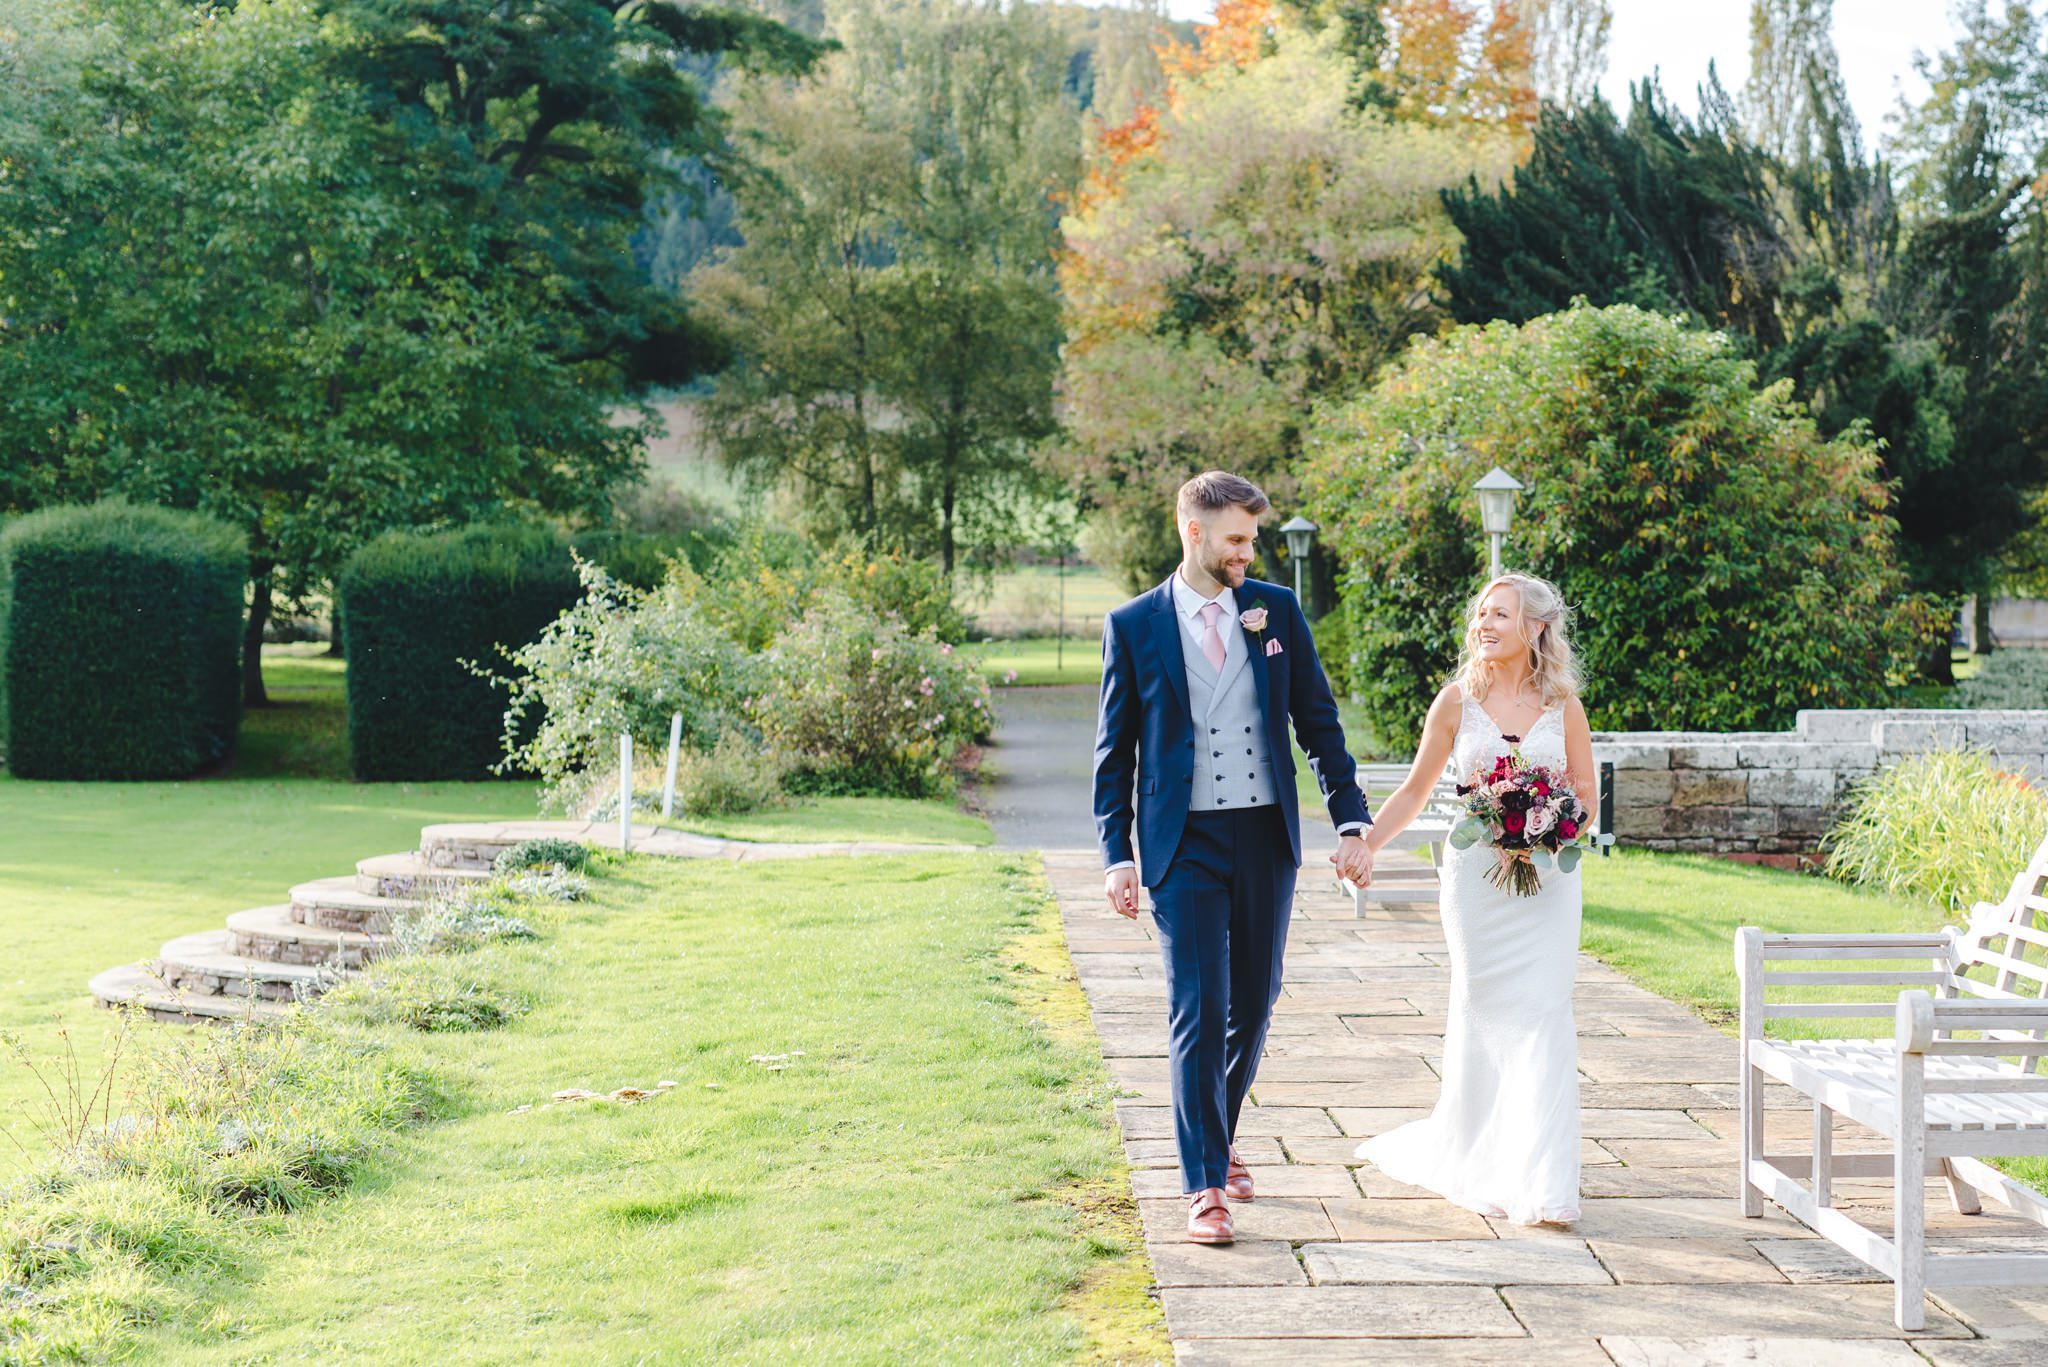 A bride and groom walking in the grounds at Brinsop Court